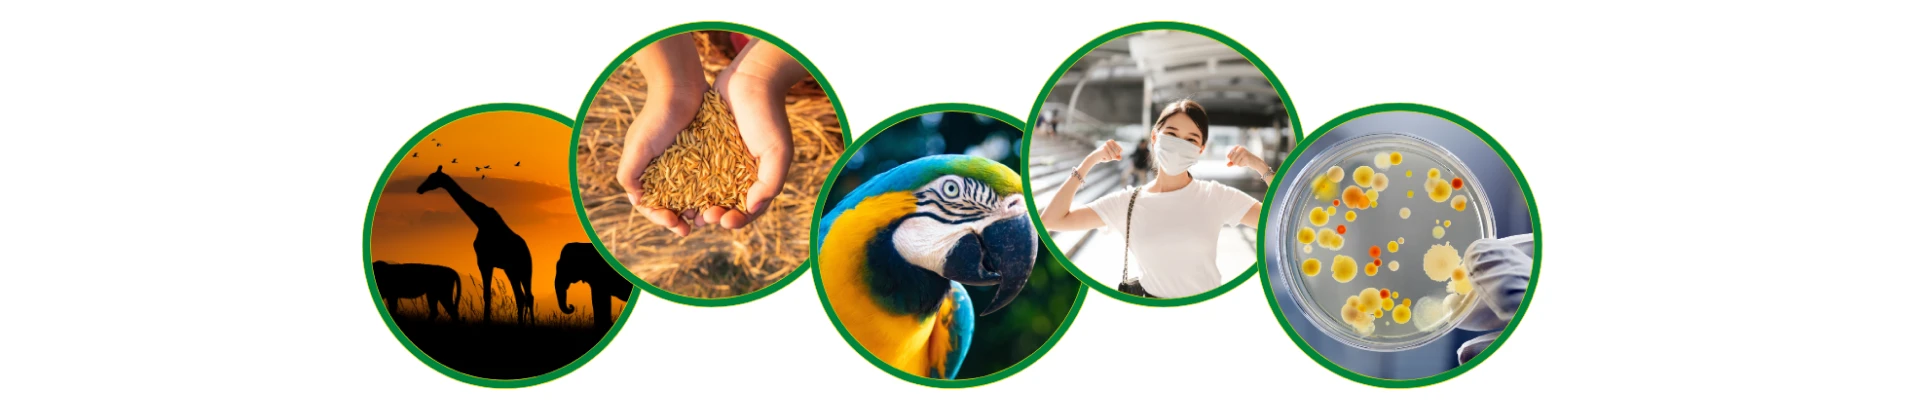 Five circular images representing various research fields: African wildlife, agricultural grains, a colorful parrot, a person in a face mask, and a petri dish with bacterial colonies.